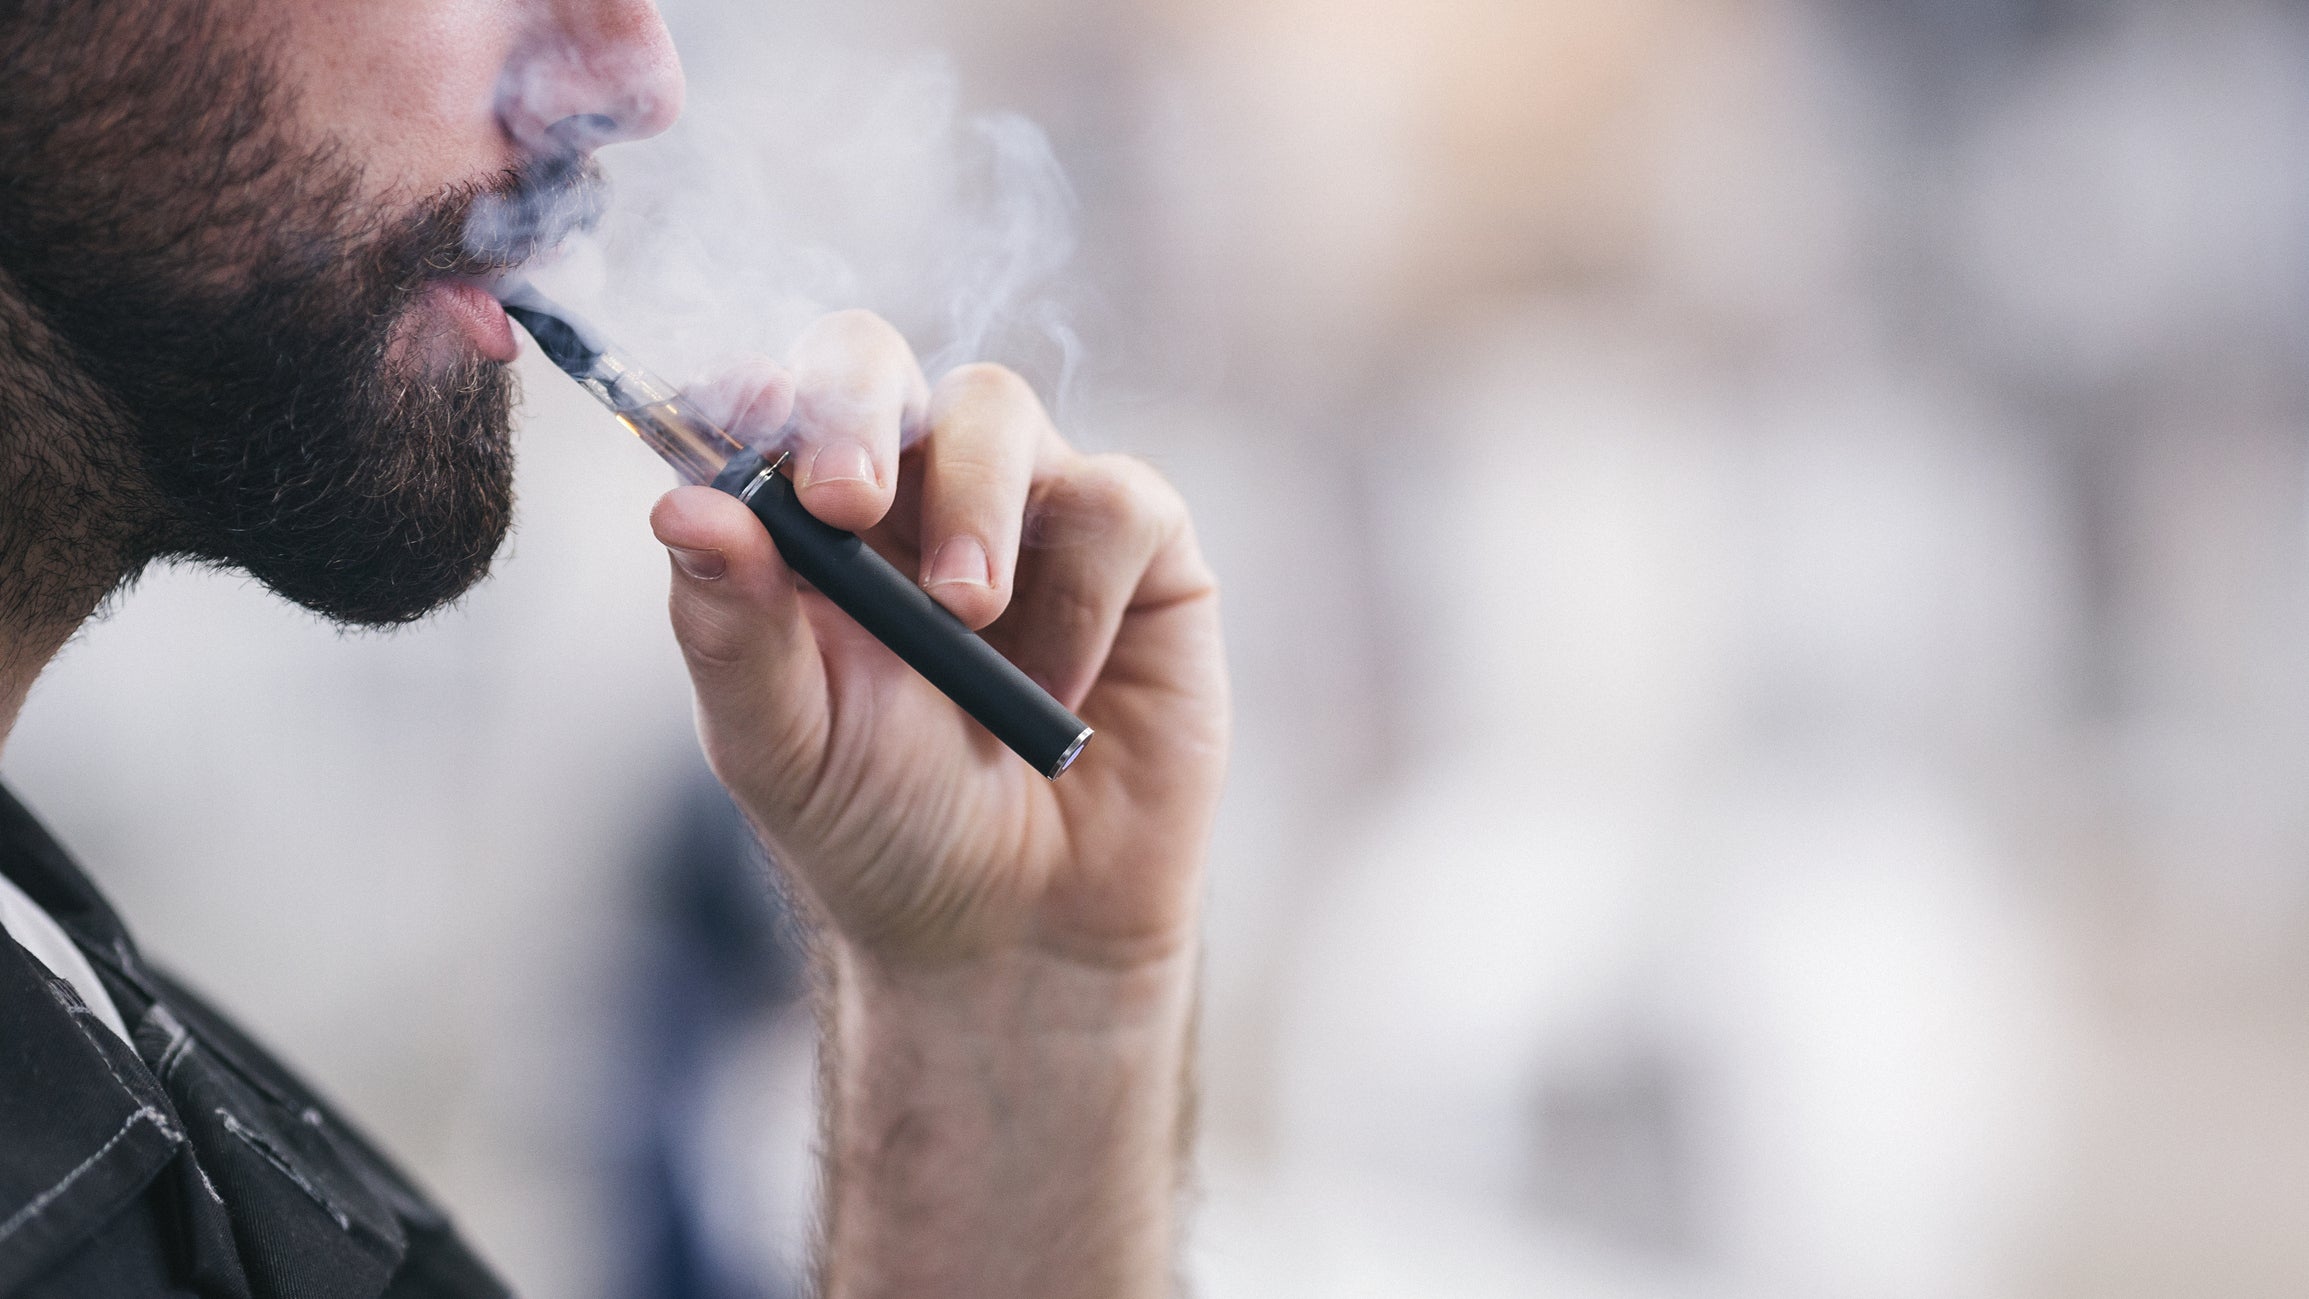 Vapes and e-cigarettes were banned from airlines in over 45 countries in 2015